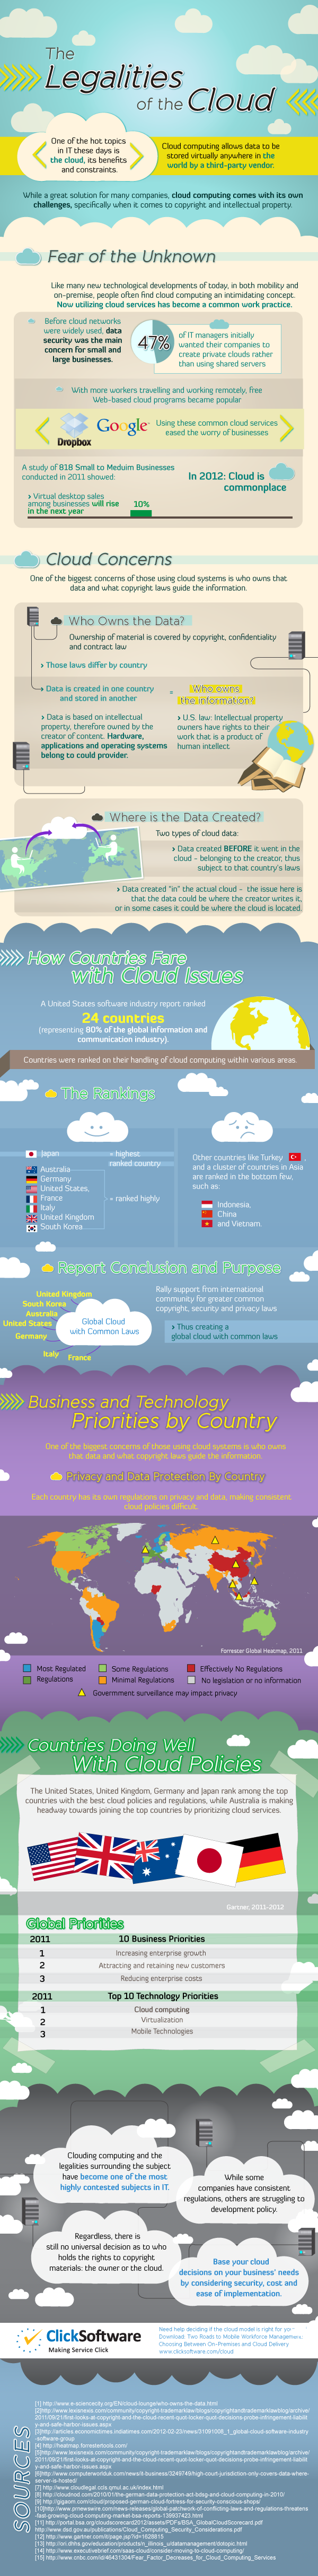 Infographics about the Legalities of the Cloud